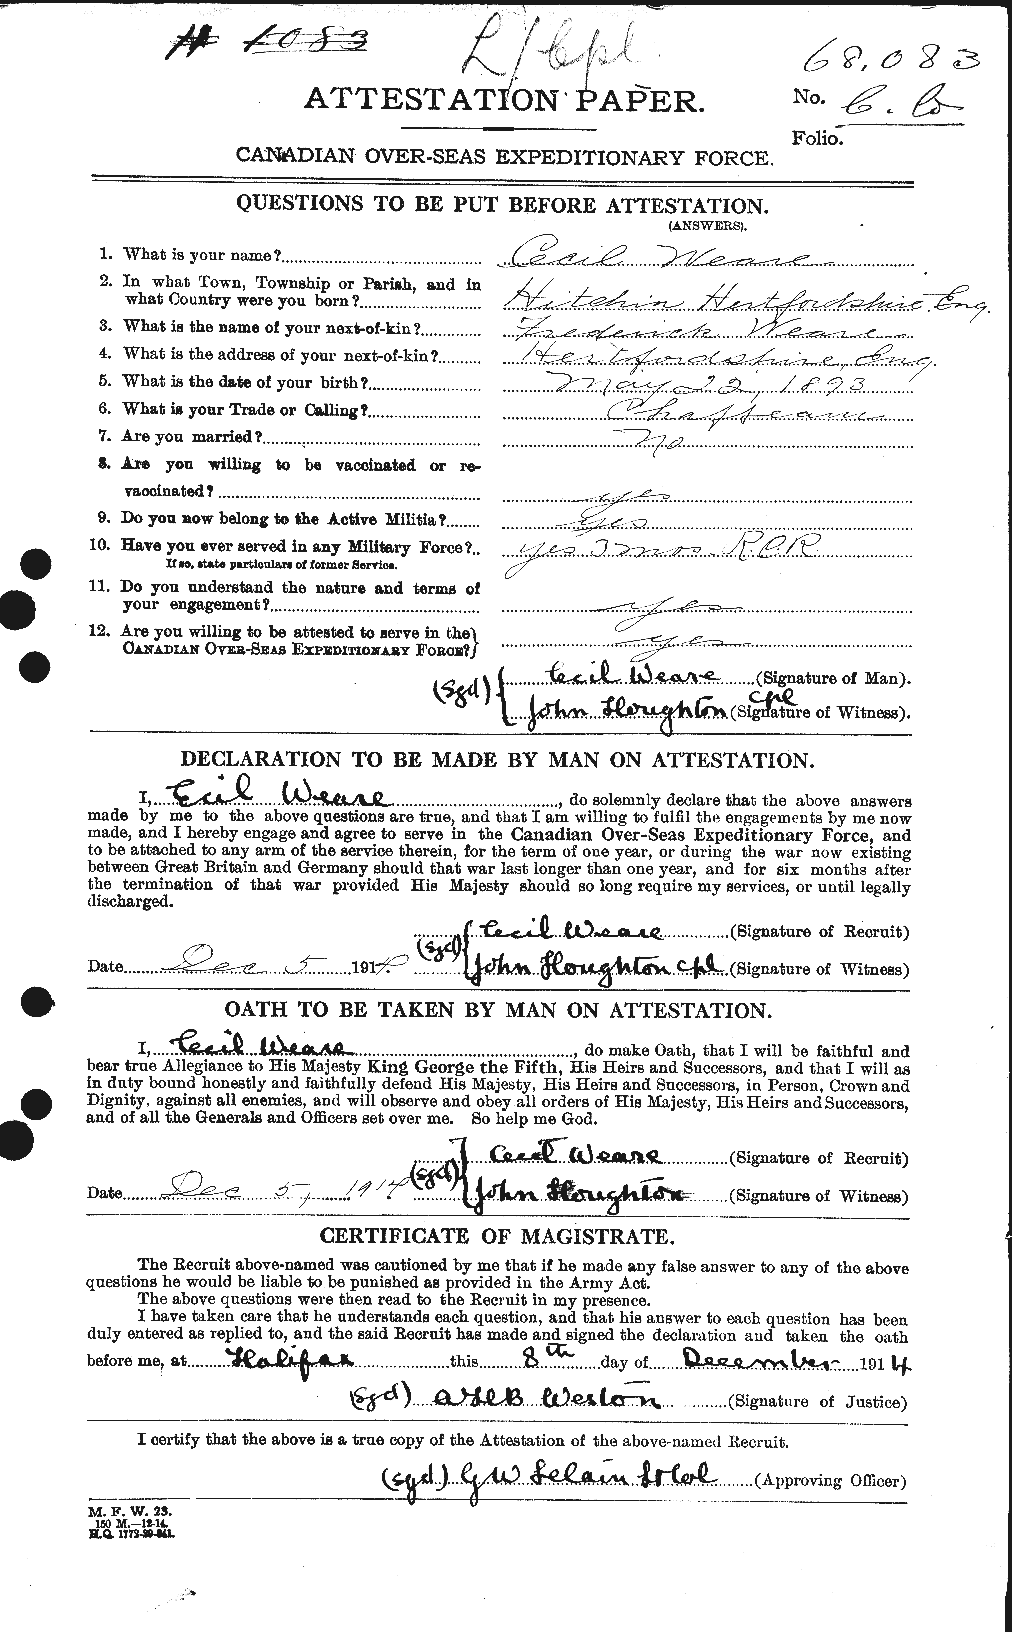 Personnel Records of the First World War - CEF 664109a